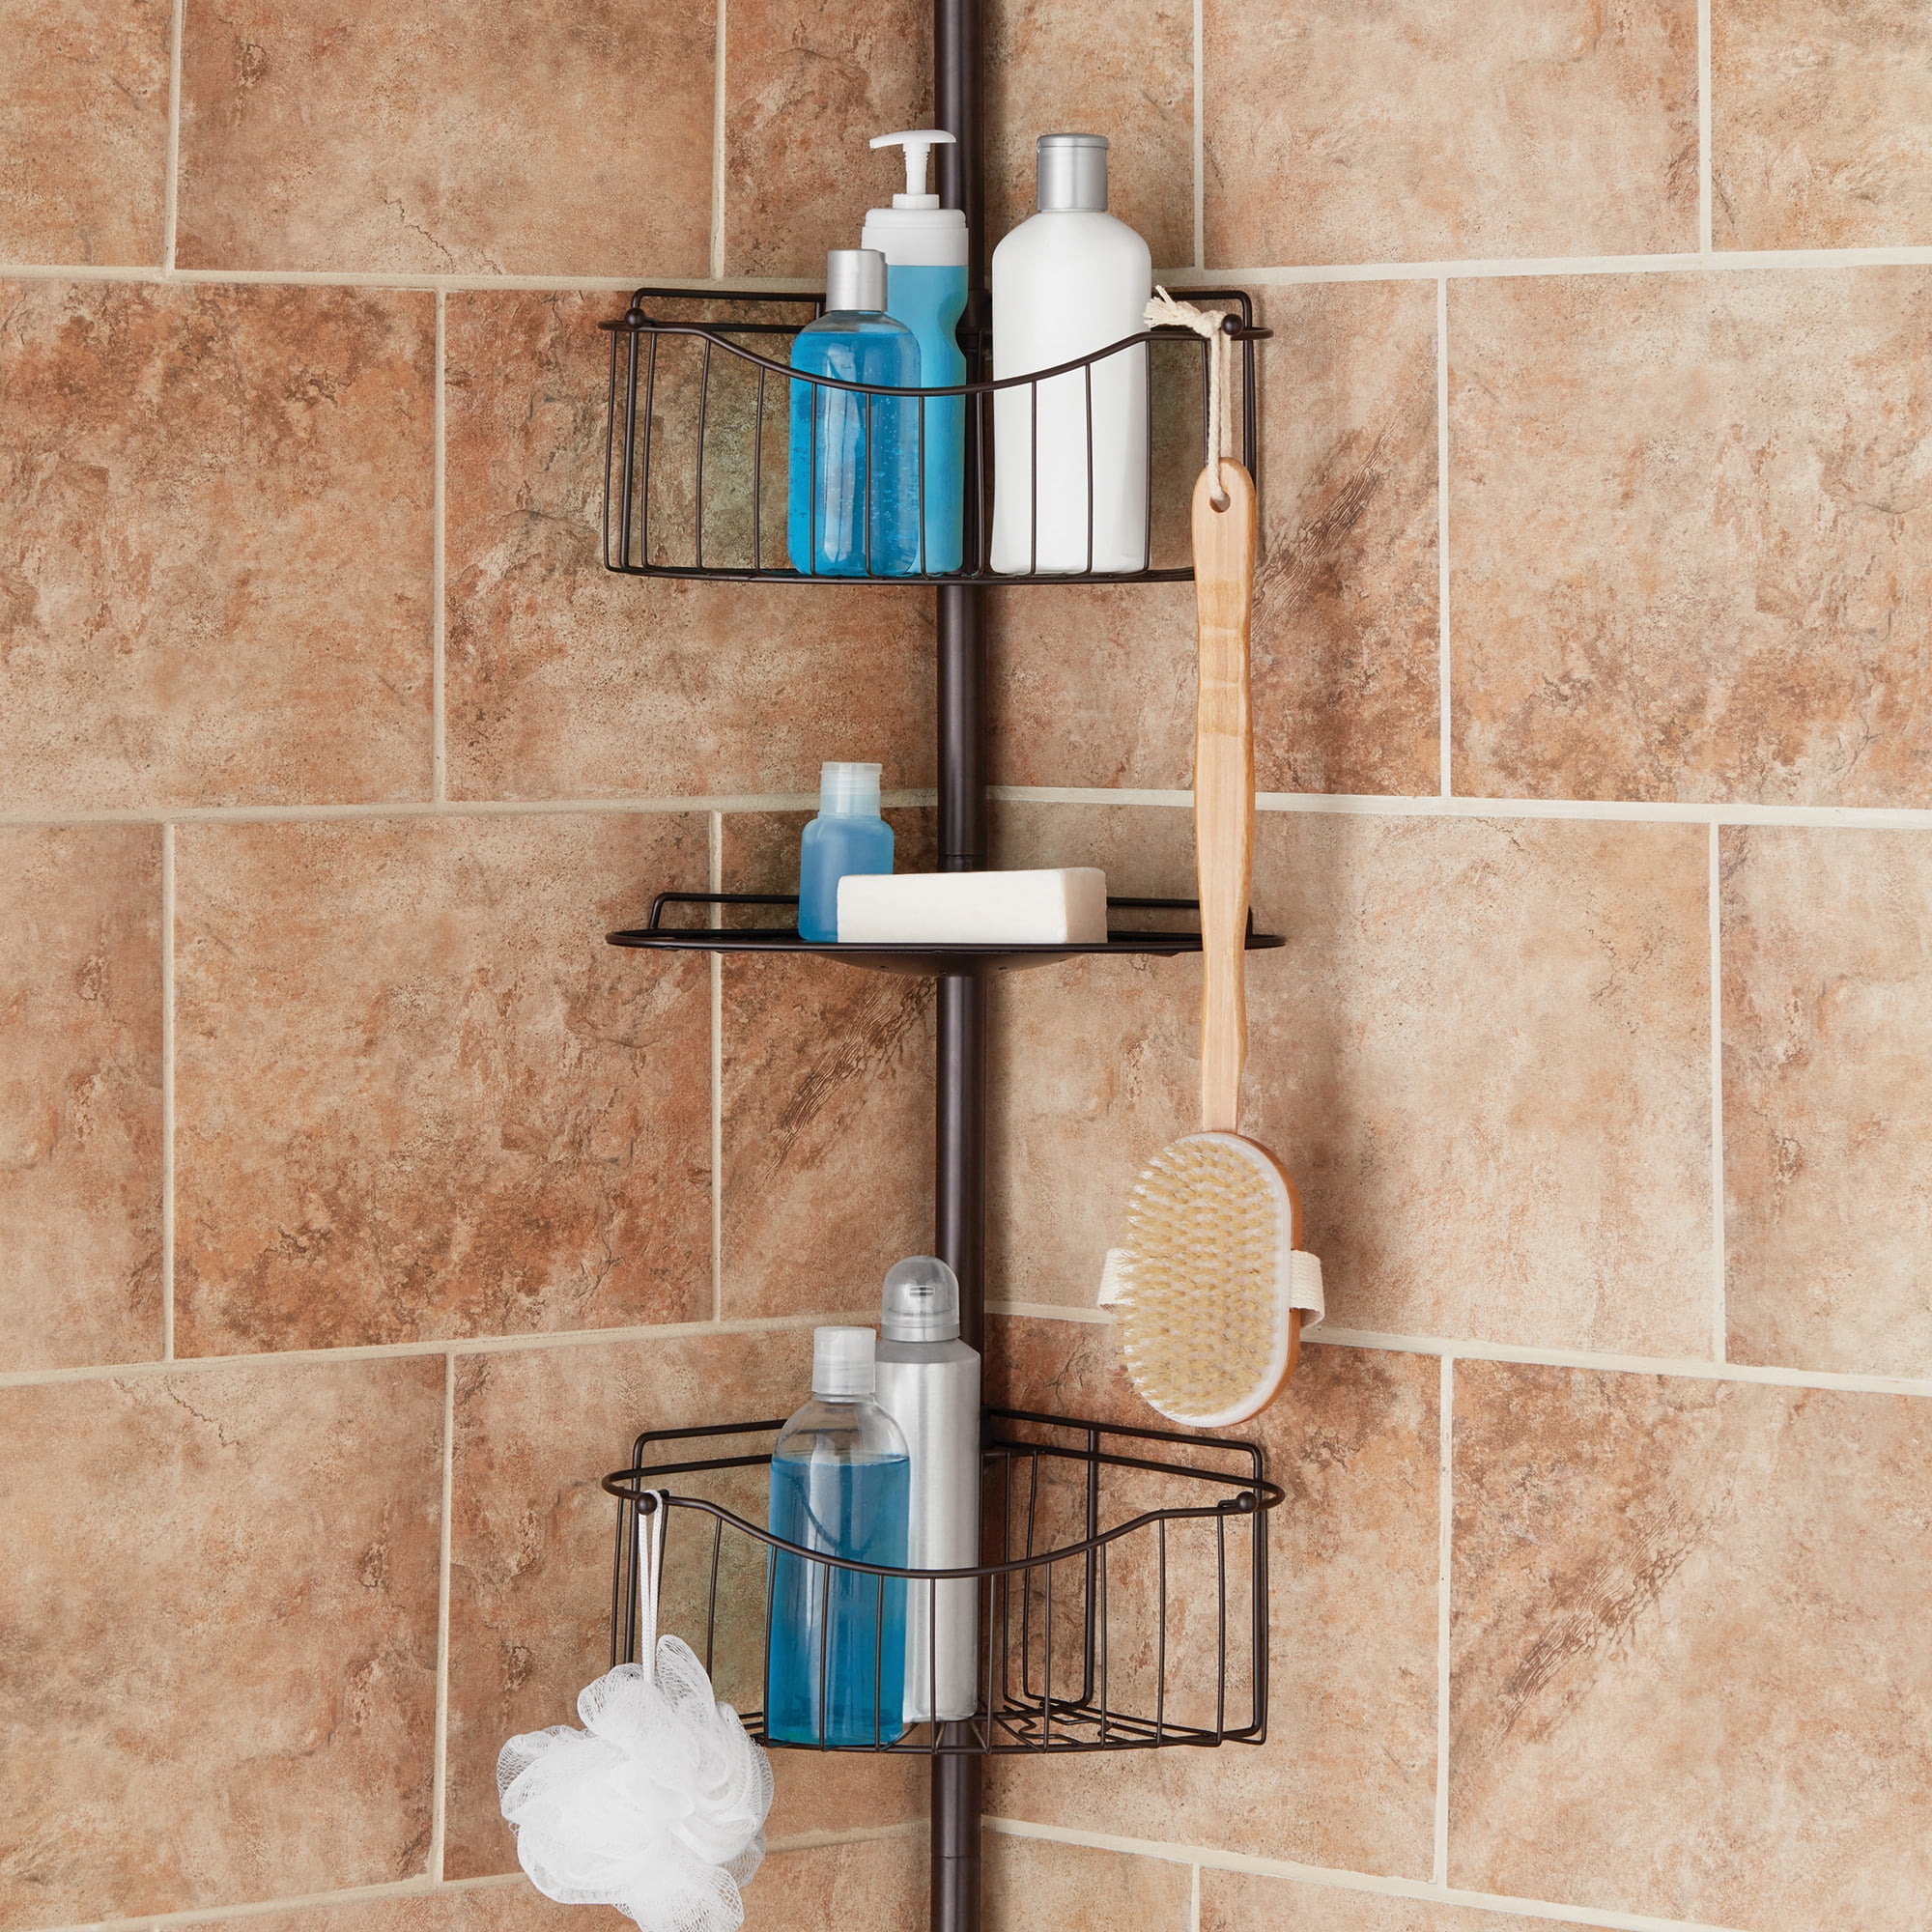 Better Homes & Gardens Rust-Resistant Tension Pole Shower Caddy, 3 Shelves,  Oil Rubbed Bronze Finish